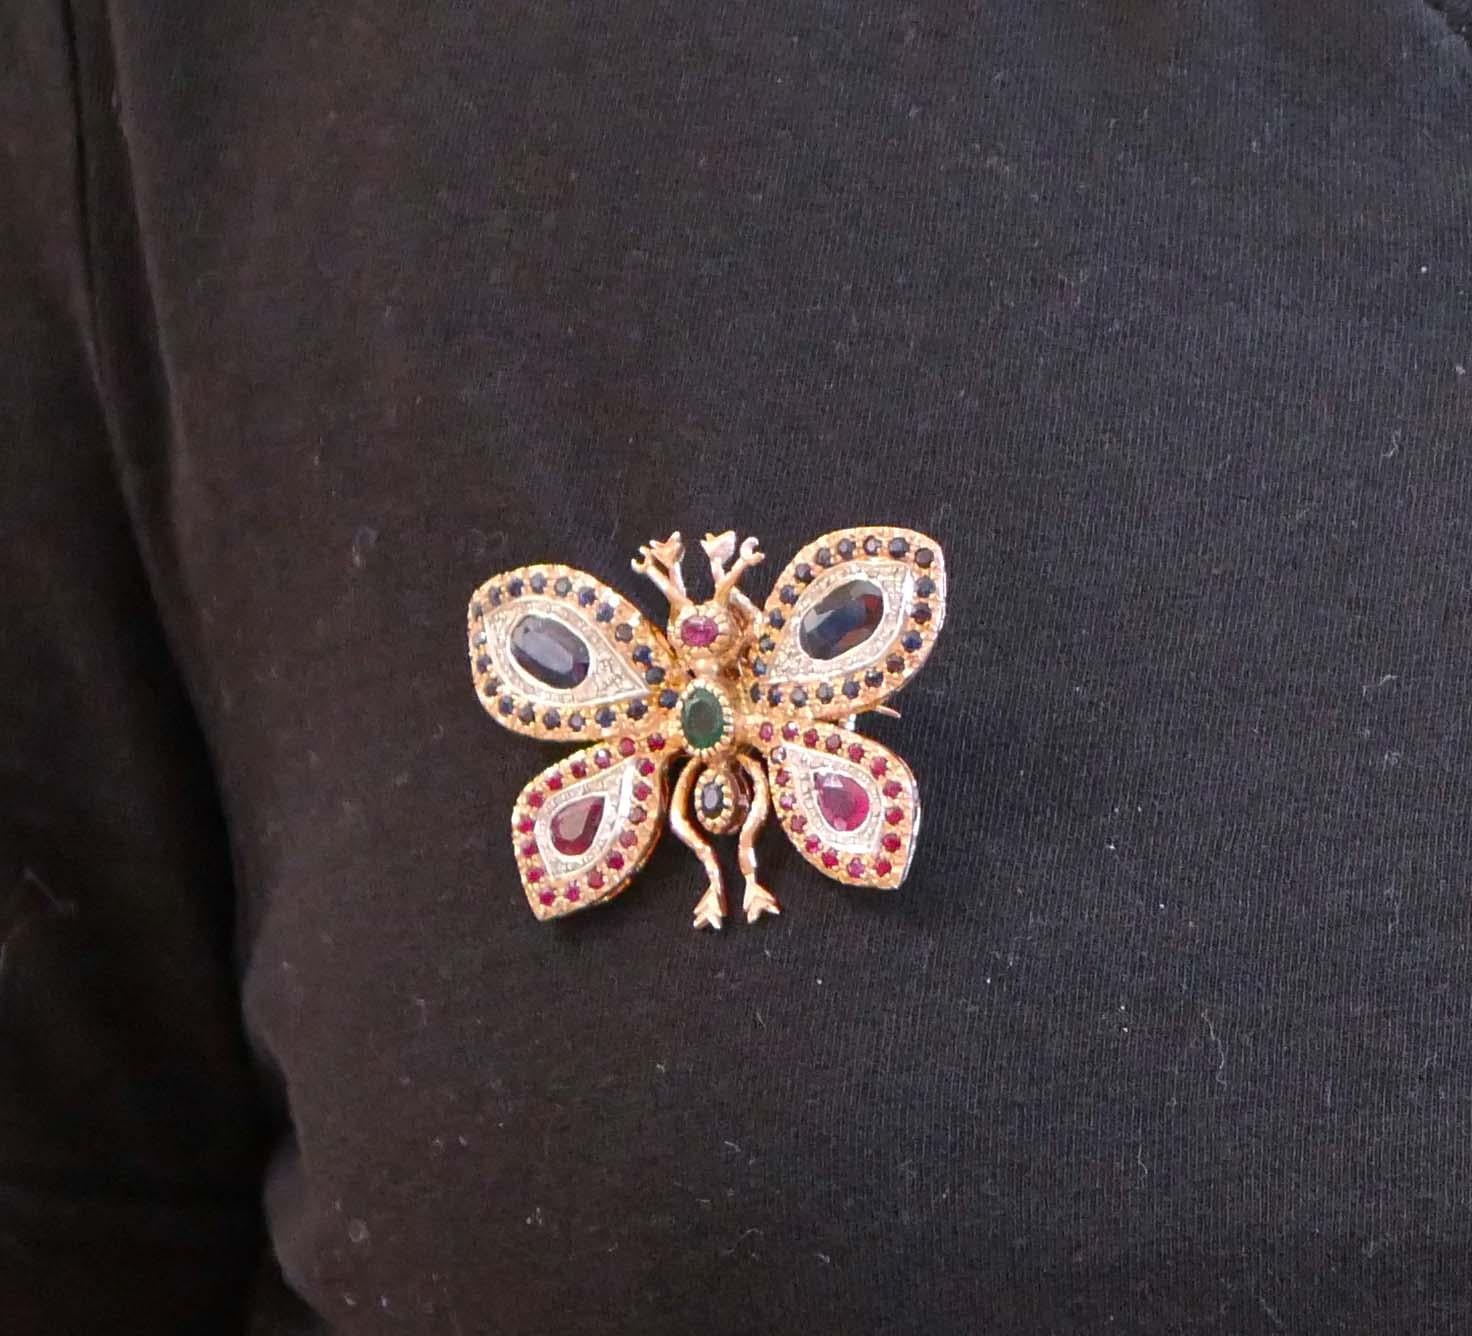 Sapphires, Rubies, Emerald, Diamonds, Rose Gold and Silver Brooch/Pendant. 2